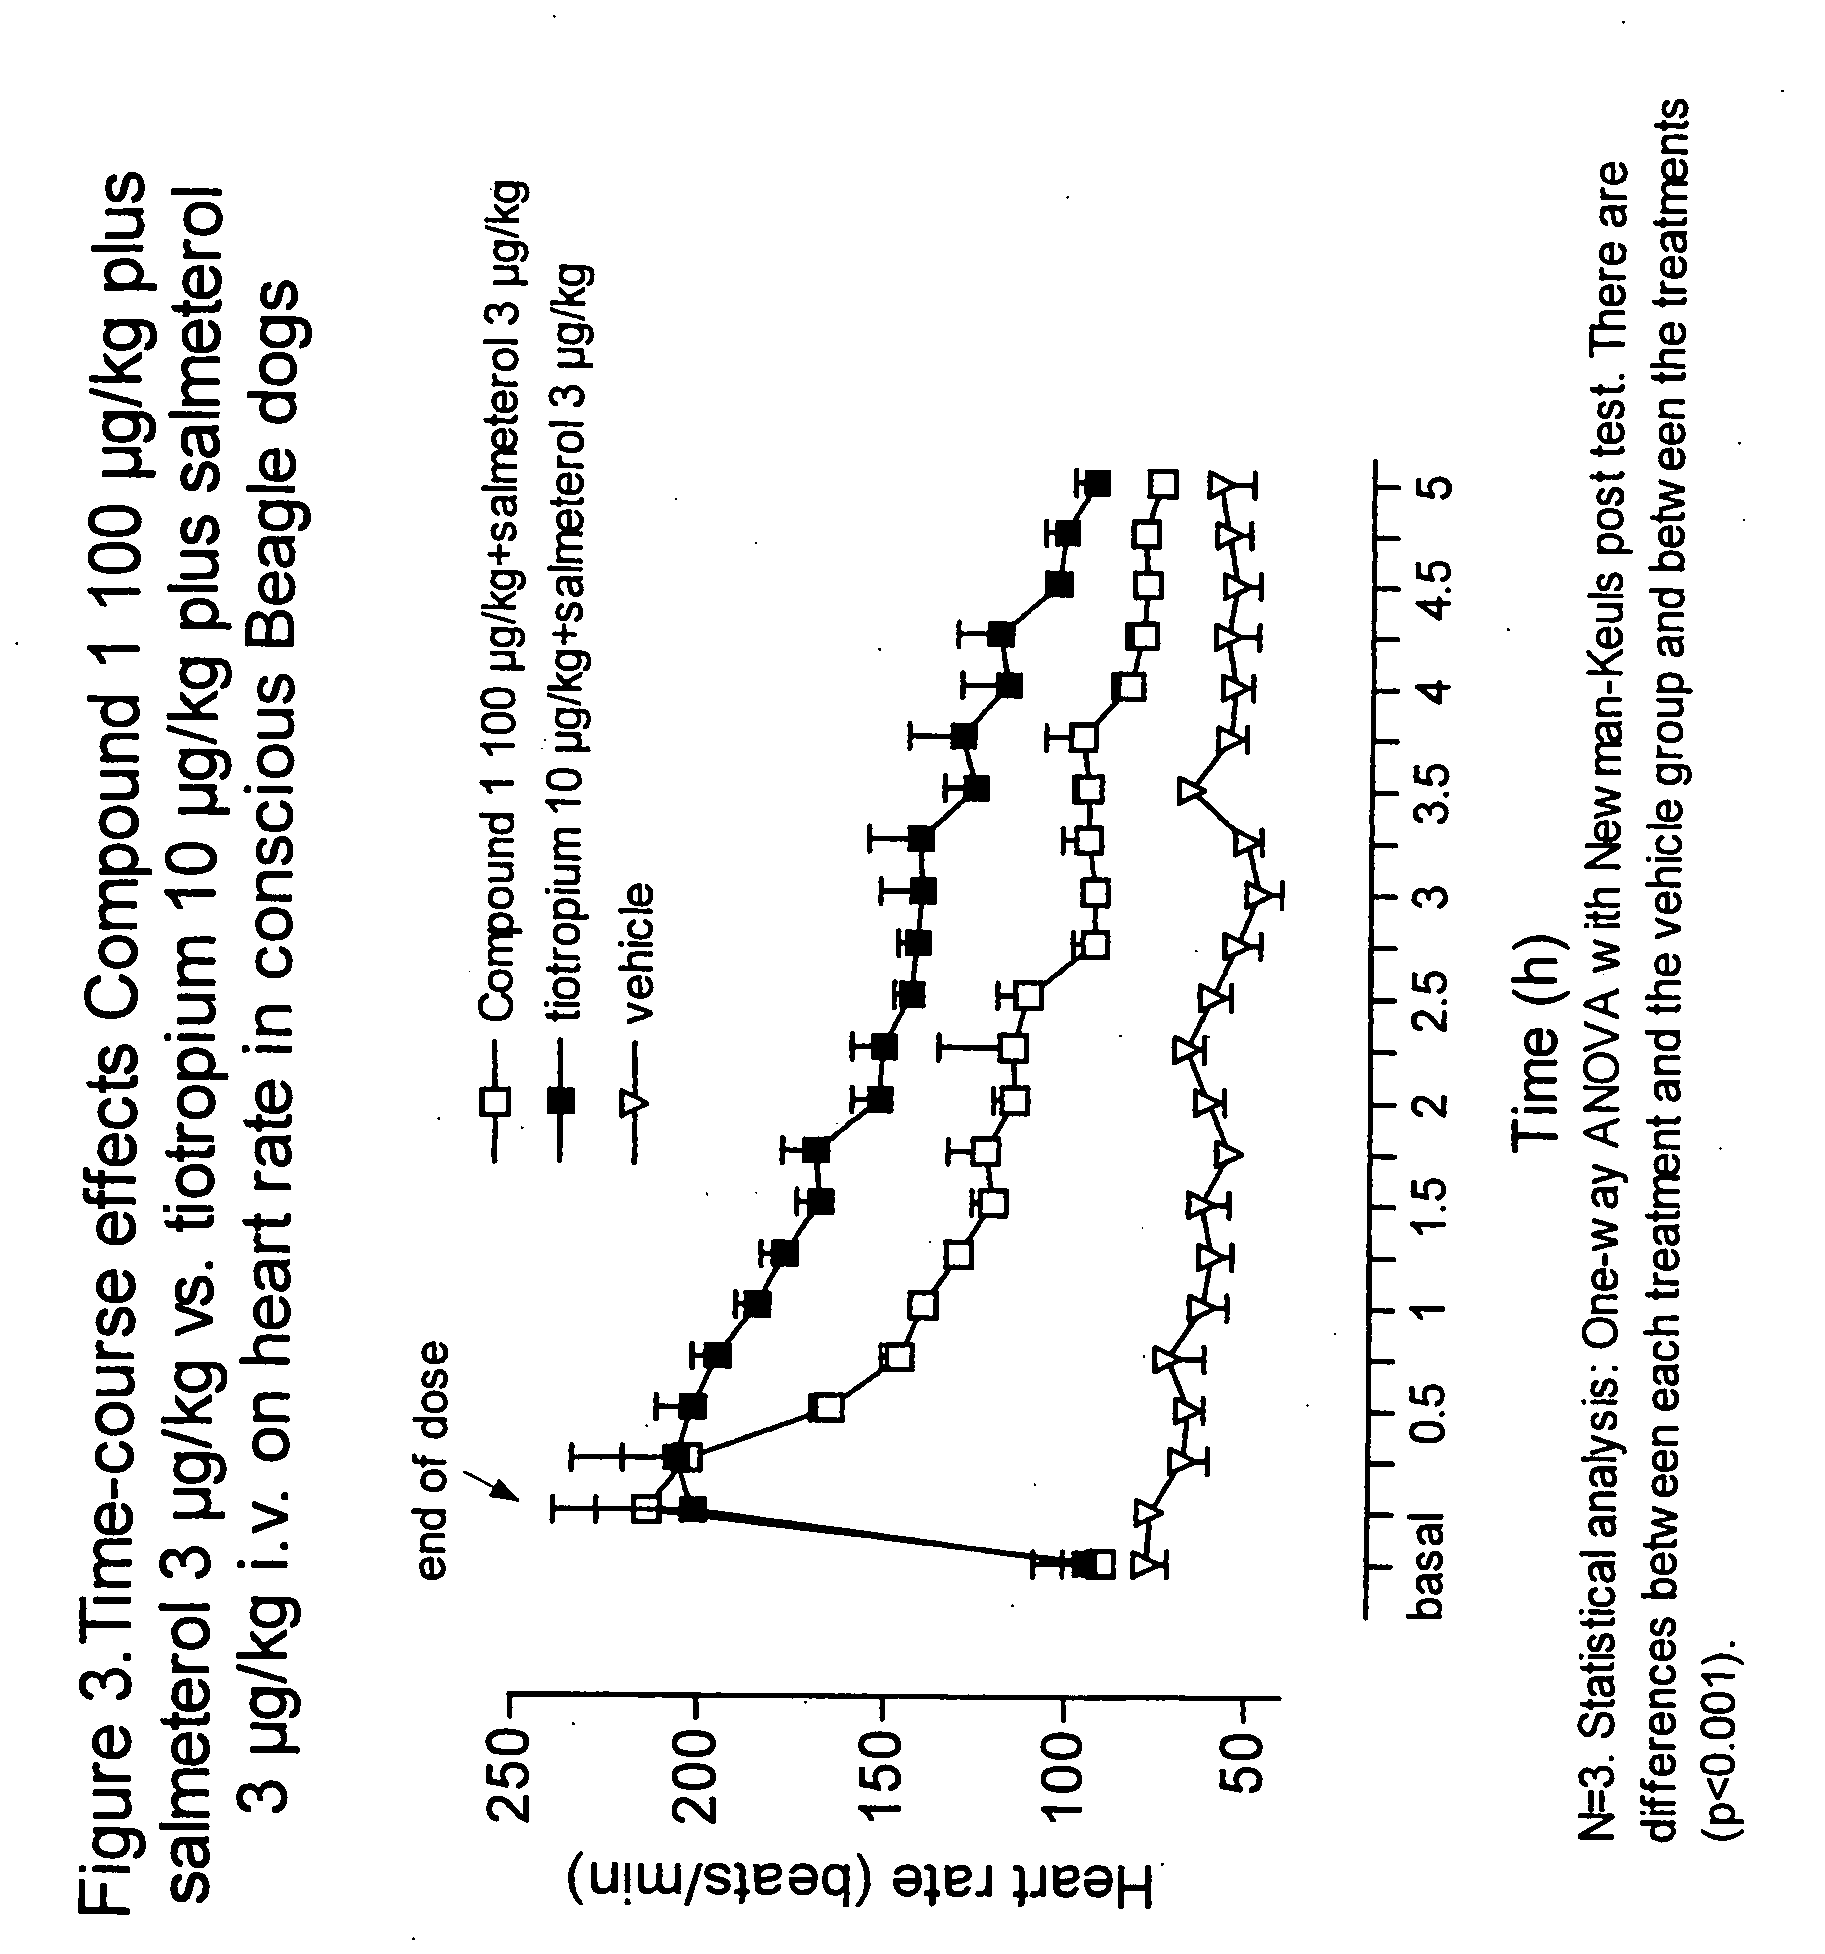 Combinations comprising antimuscarinic agents and beta-adrenergic agonists